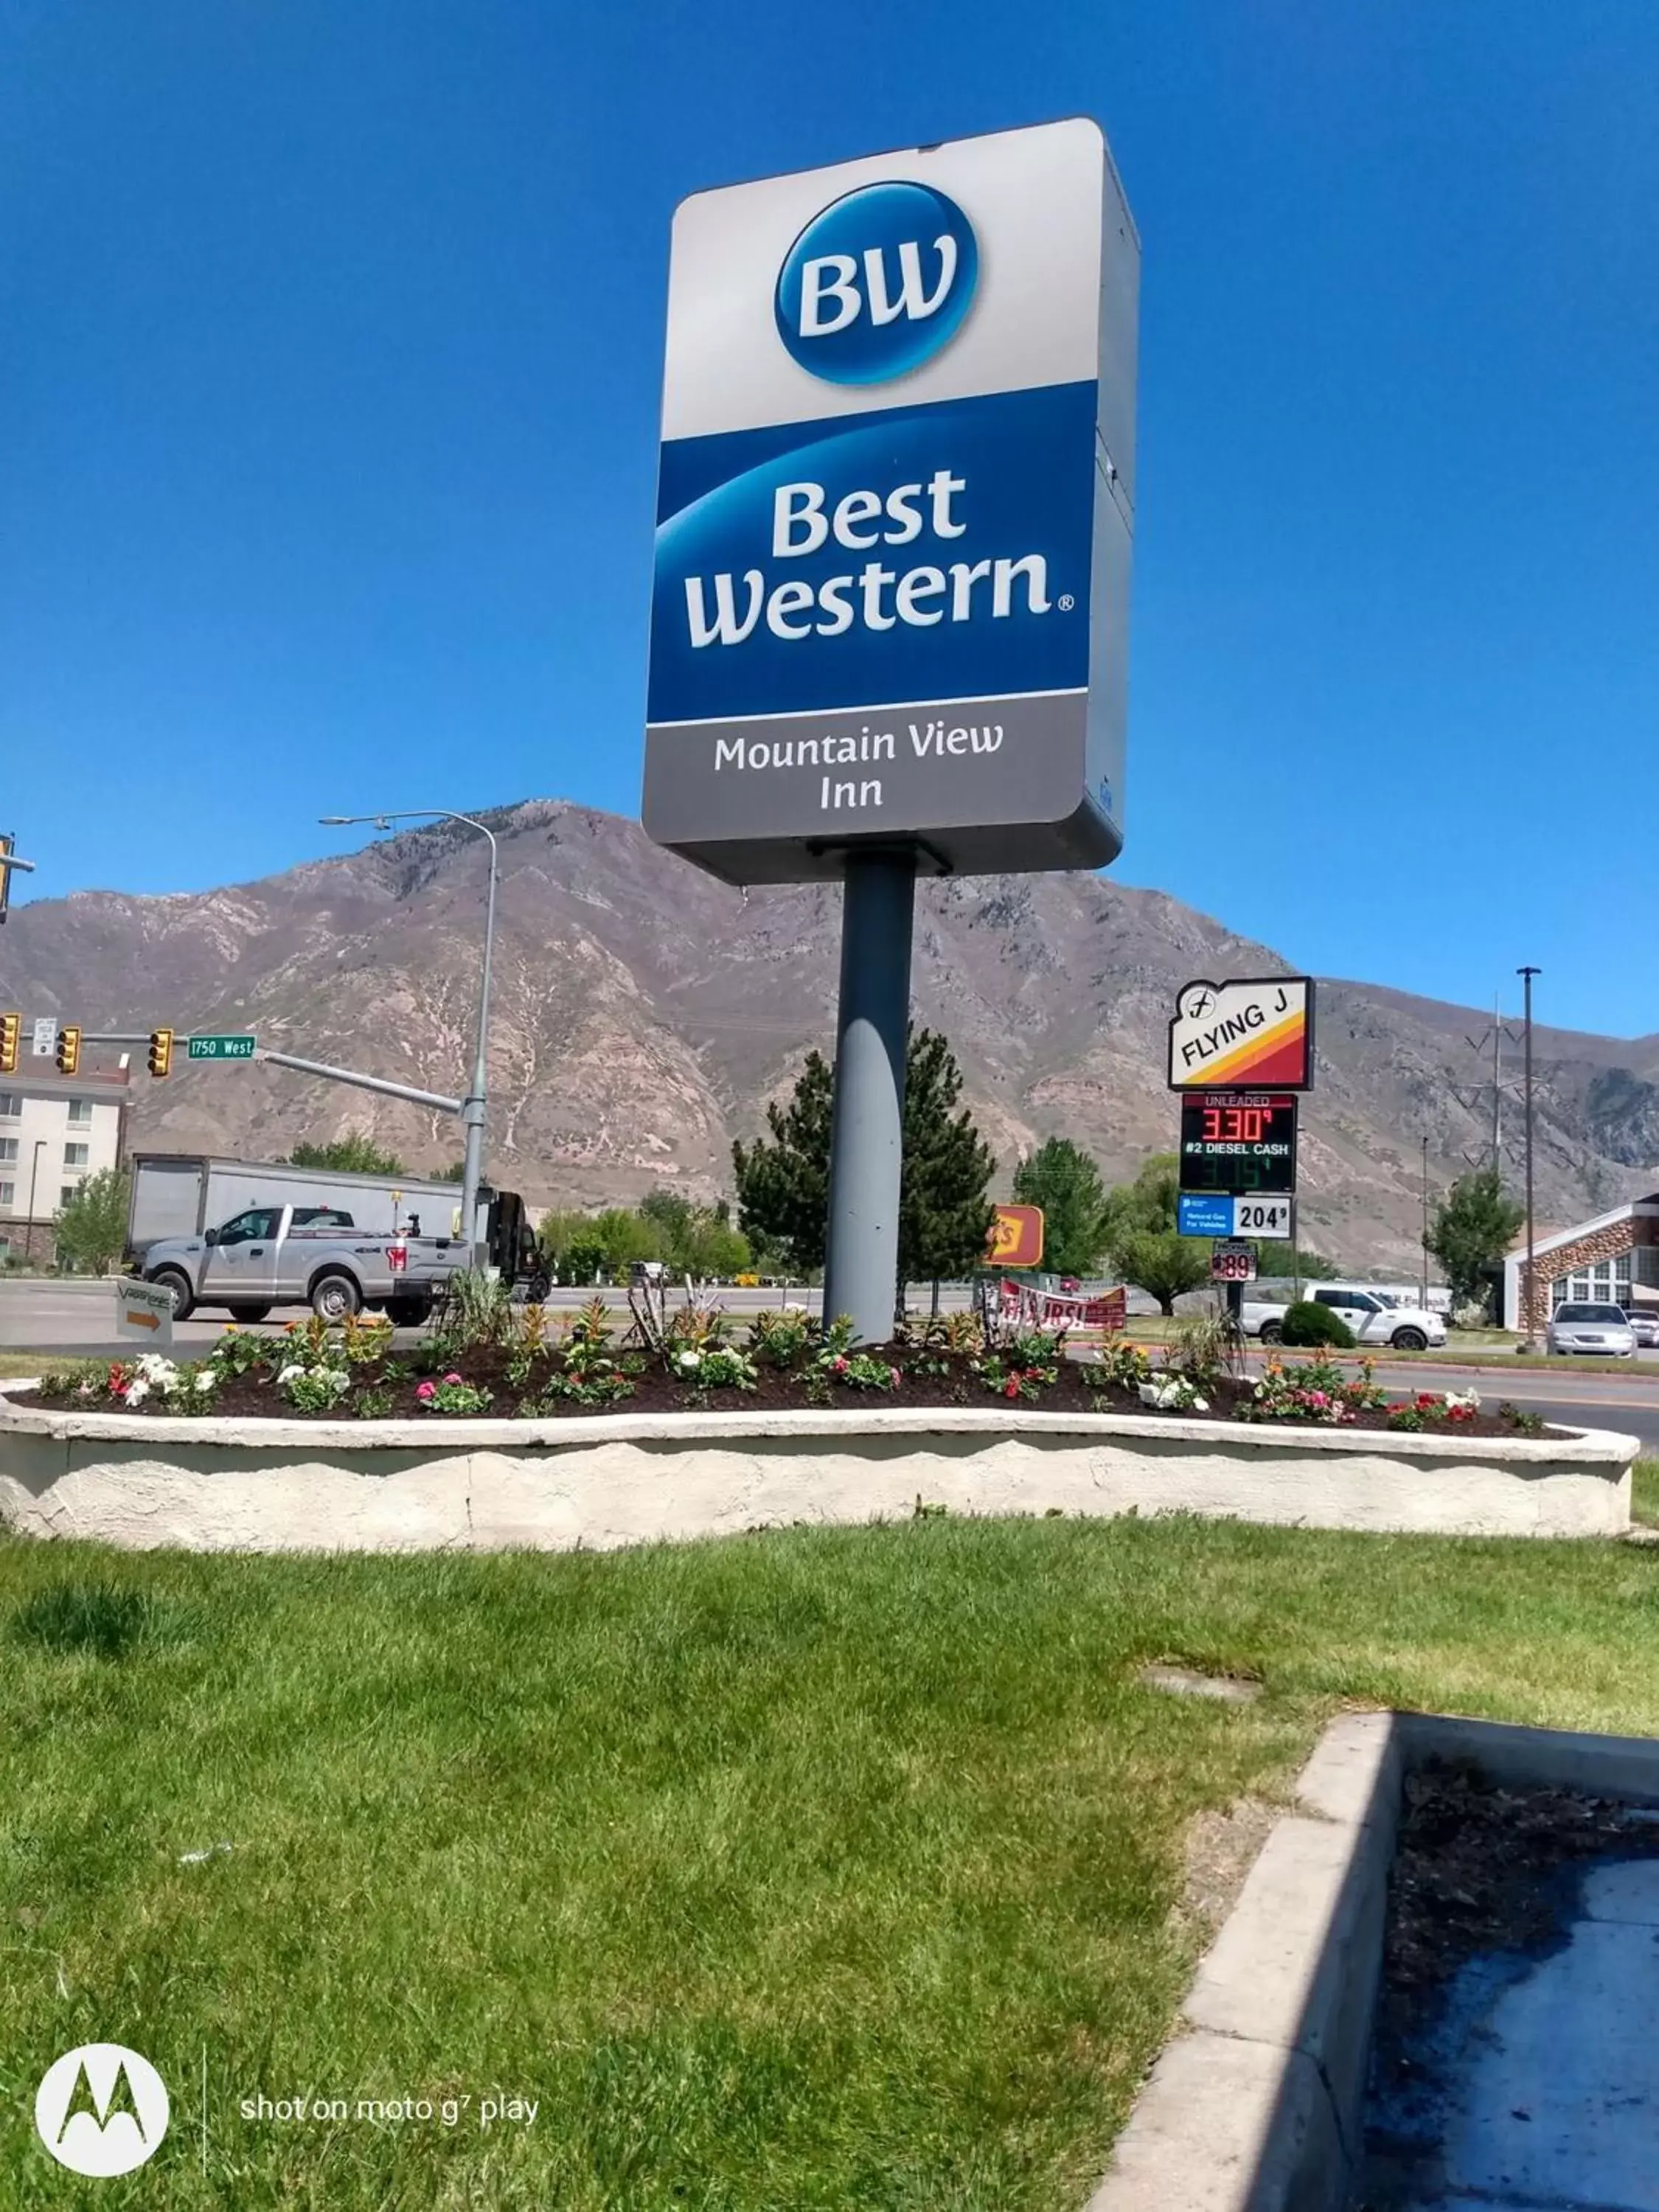 Property logo or sign in Best Western Mountain View Inn